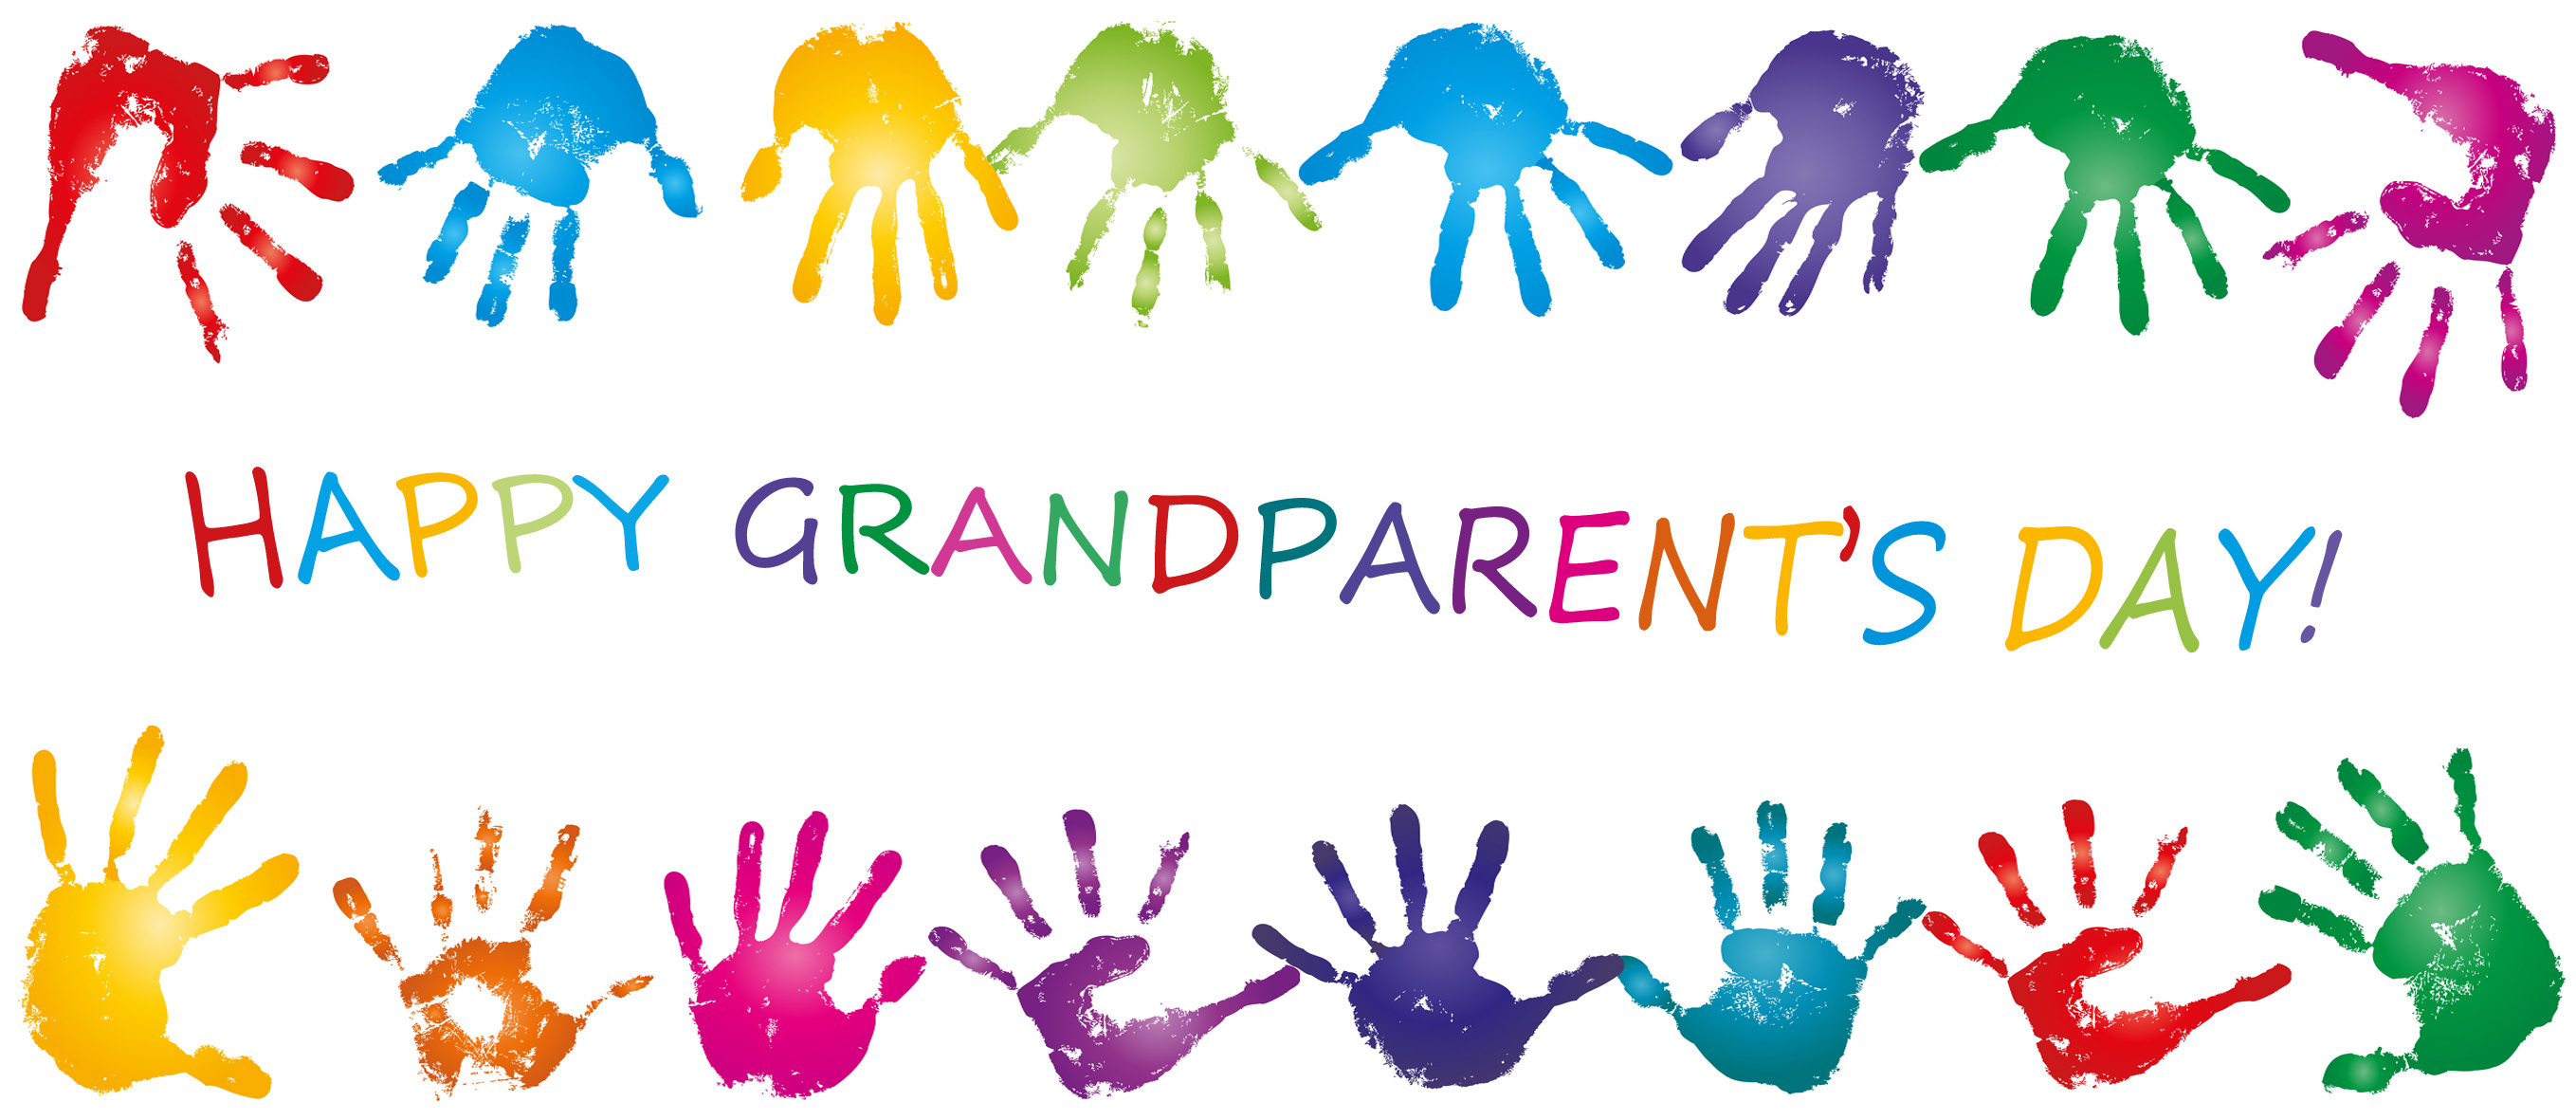 Happy National Grandparent's Day HD Wallpapers, Images & Pictures {2017}*